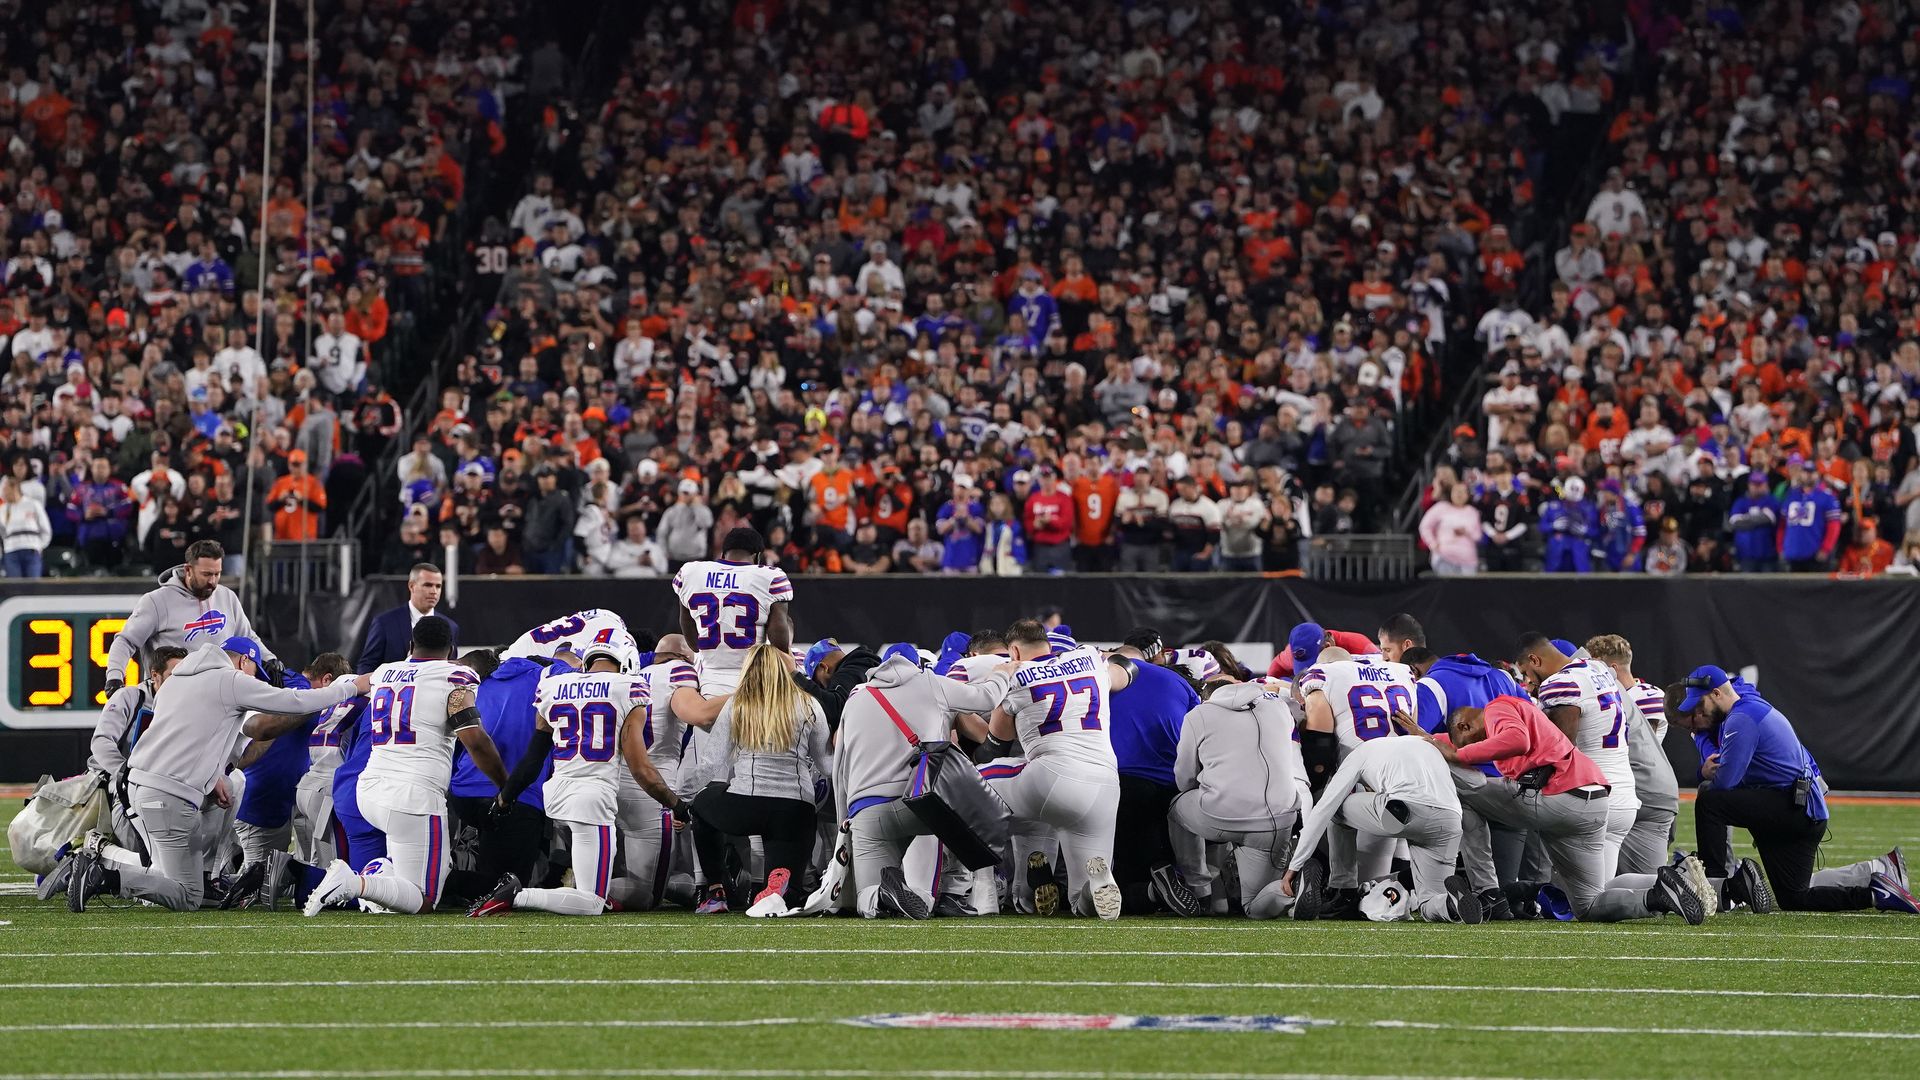 Buffalo Bills players huddle and pray after teammate Damar Hamlin #3 collapsed on the field after making a tackle against the Cincinnati Bengals in Cincinnati, Ohio, Jan. 3. 